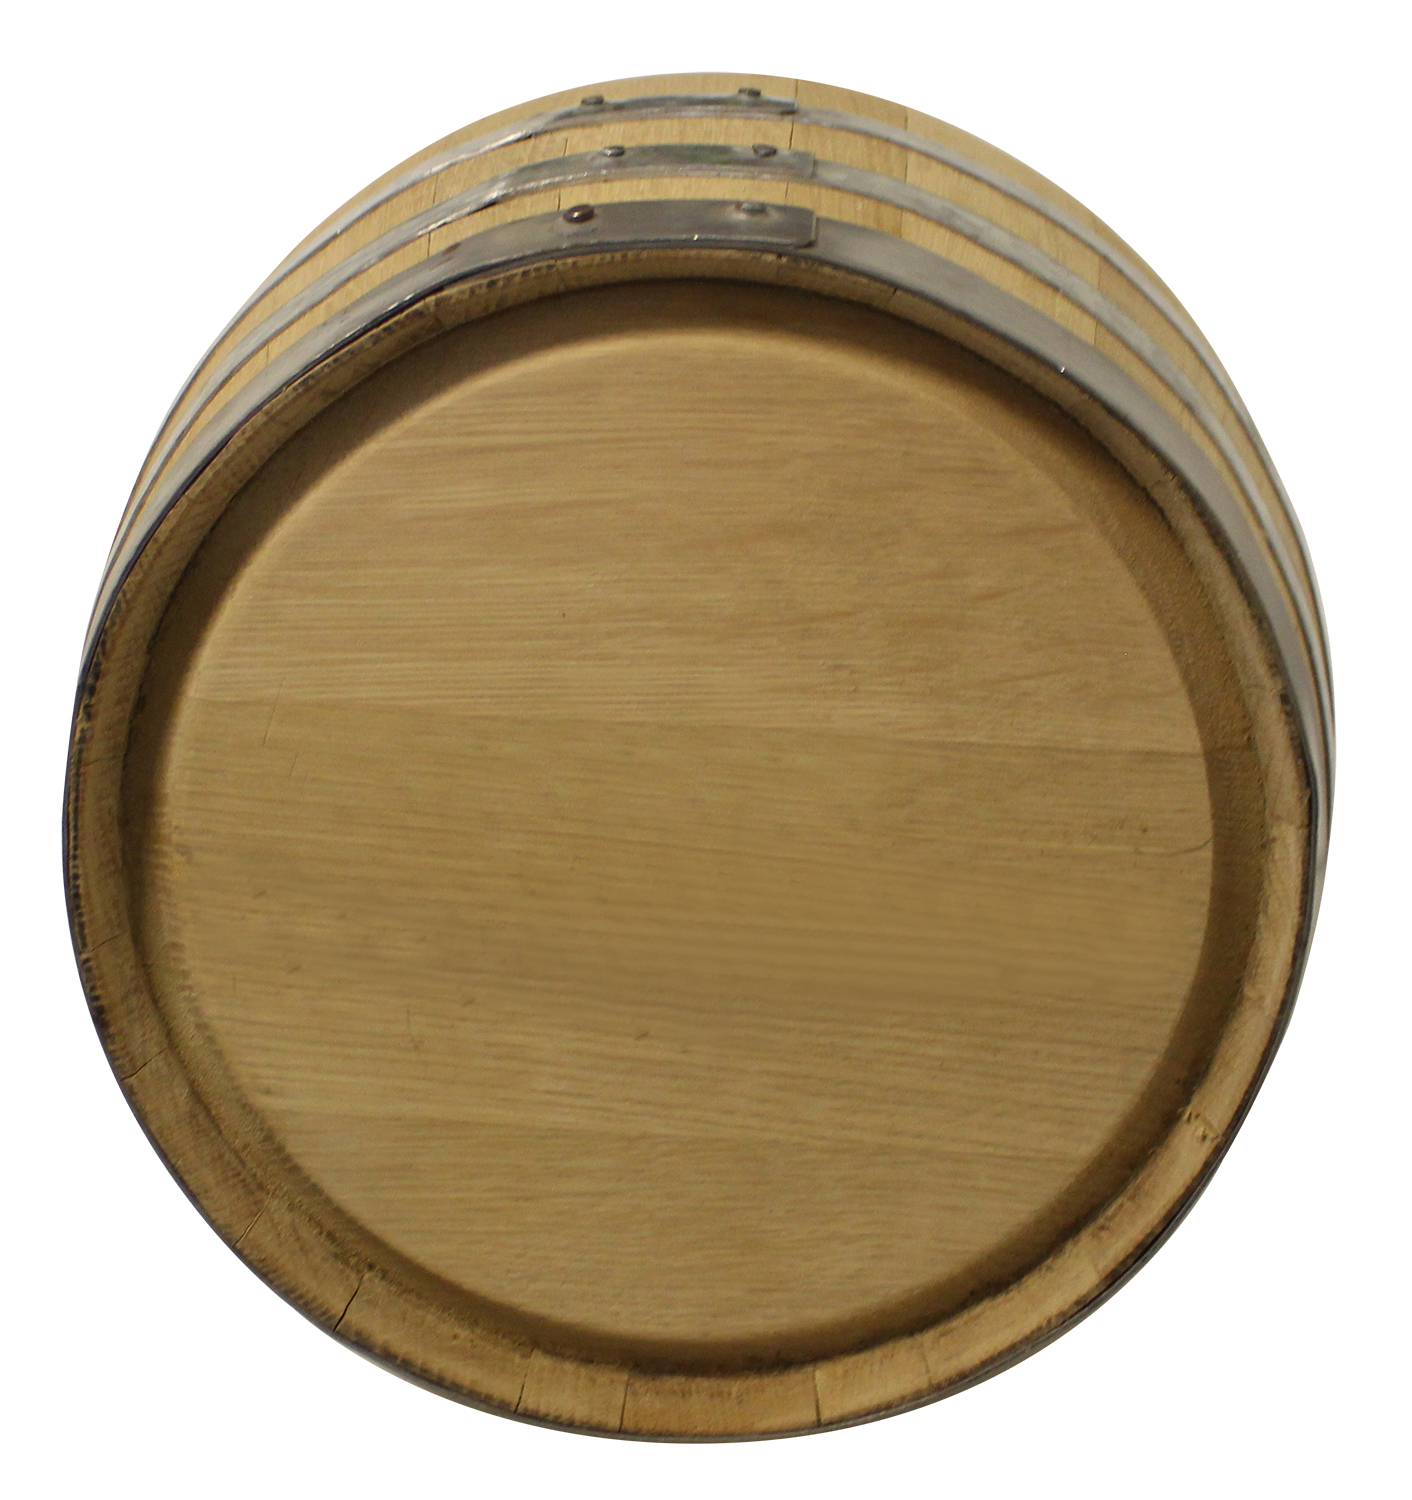 HBO Home Brew Ohio 5 Gallon New White Oak Barrel For Aging Whiskey, Bourbon, Wine, Cider, Beer Or As Decor